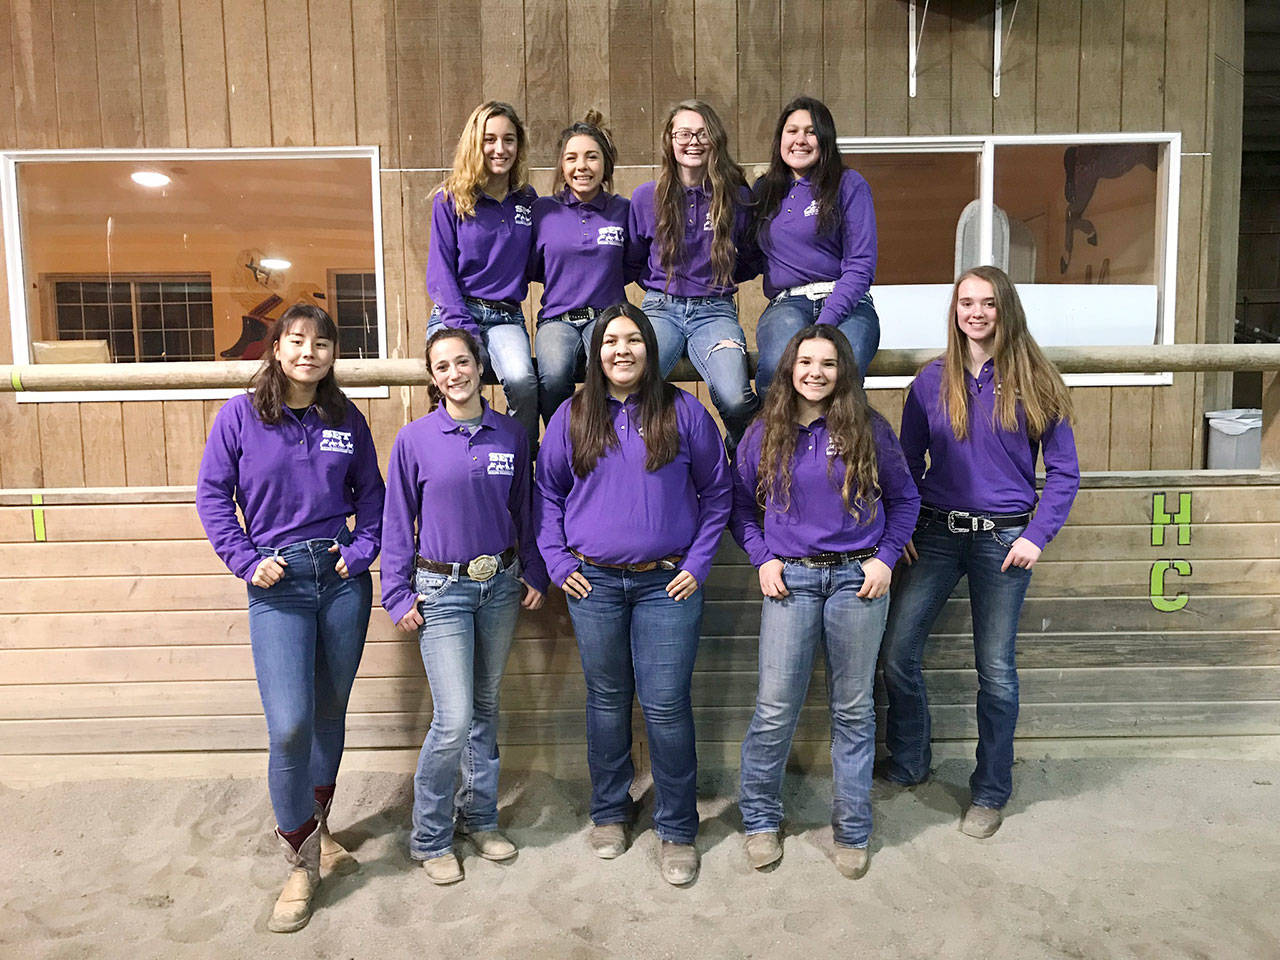 Sequim Equestrian Team members enjoy their first competition of the year in Elma in early March. Team members include (back row, from left) Grace Niemeyer, Miranda Williams, Keri Tucker and Abby Garcia, with (front row, from left) Khelea Cloetens, Yana Hoesel, Lilly Thomas, Abbi Priest and Chloe VanProyen. Submitted photo